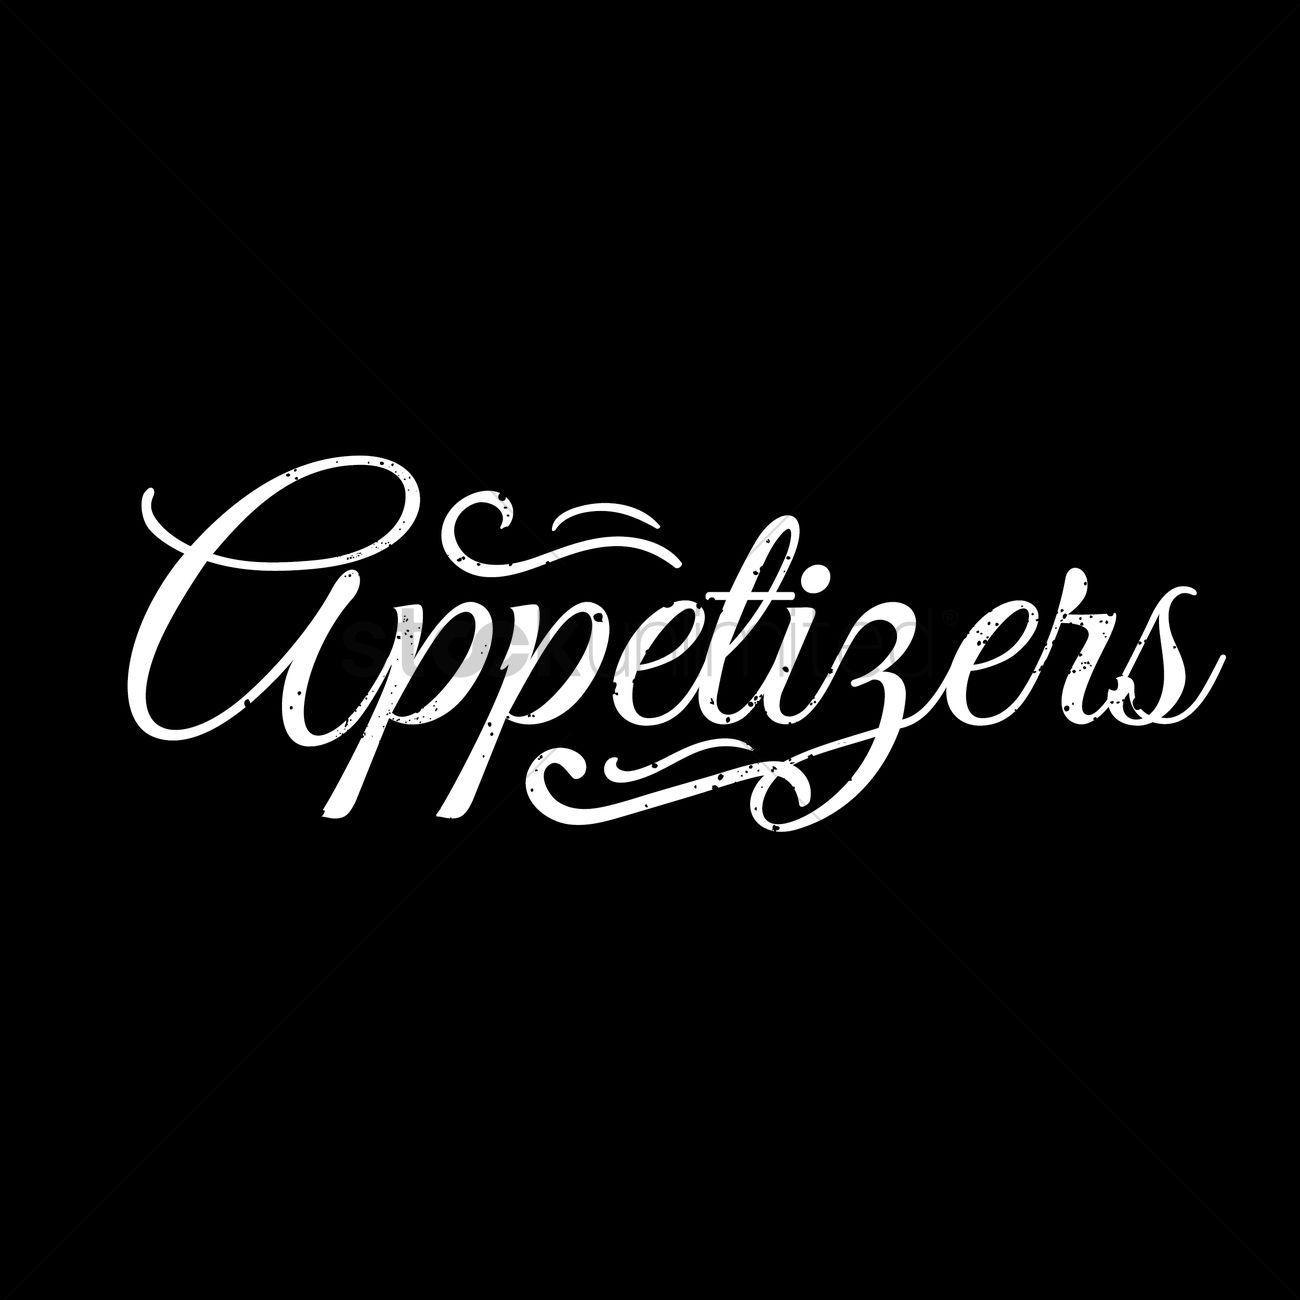 Appetizers Logo - Appetizers typography Vector Image - 1824806 | StockUnlimited